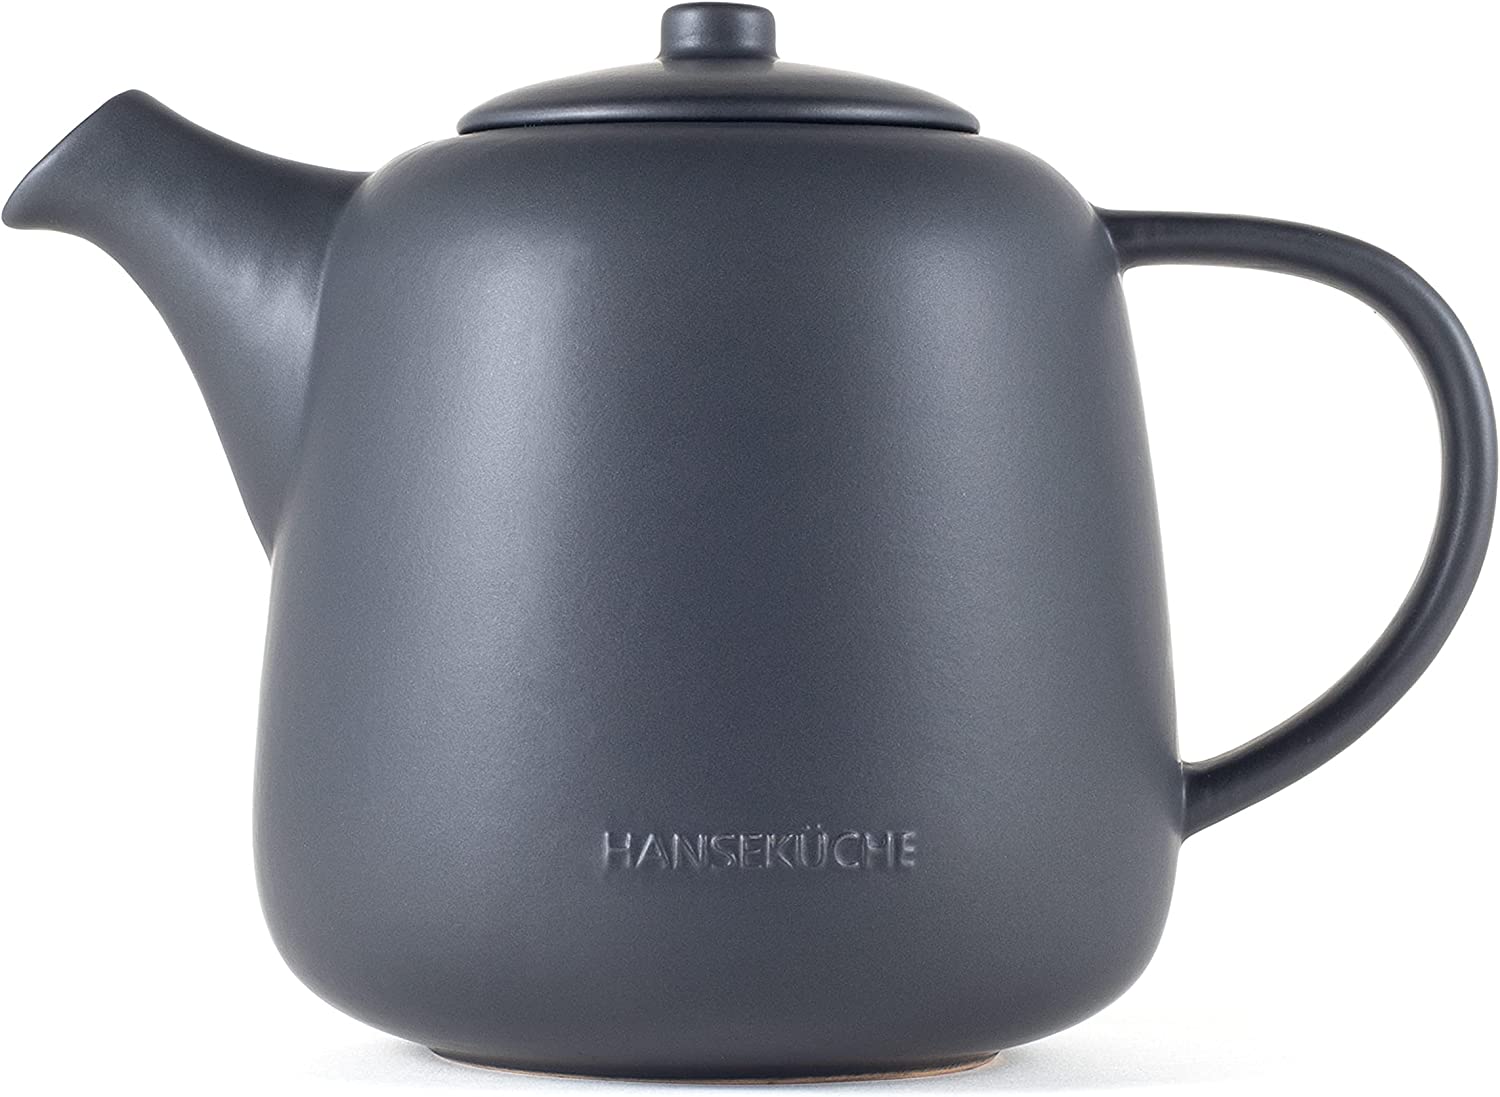 Hanseatic kitchen Porcelain Teapot (1.3 l) - High Quality Teapot with Strainer Insert Made of 304 Stainless Steel - Design Ceramic Teapot for Tea and Tea Bags